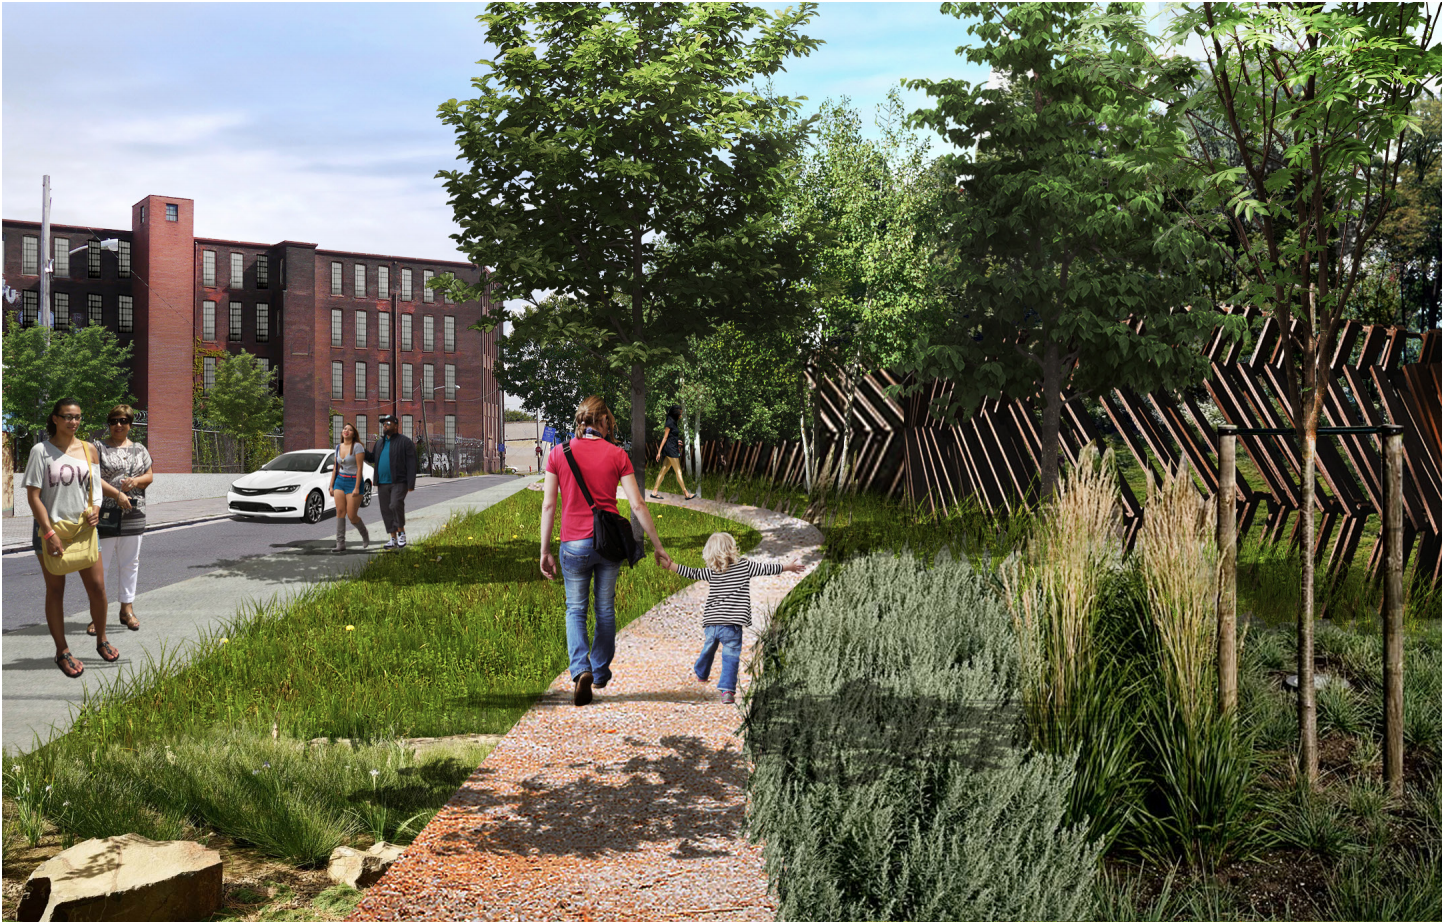 A rendering showing Impact Services' concept for a greenway alongside the Conrail tracks on Tusculum Street. (Impact Services)